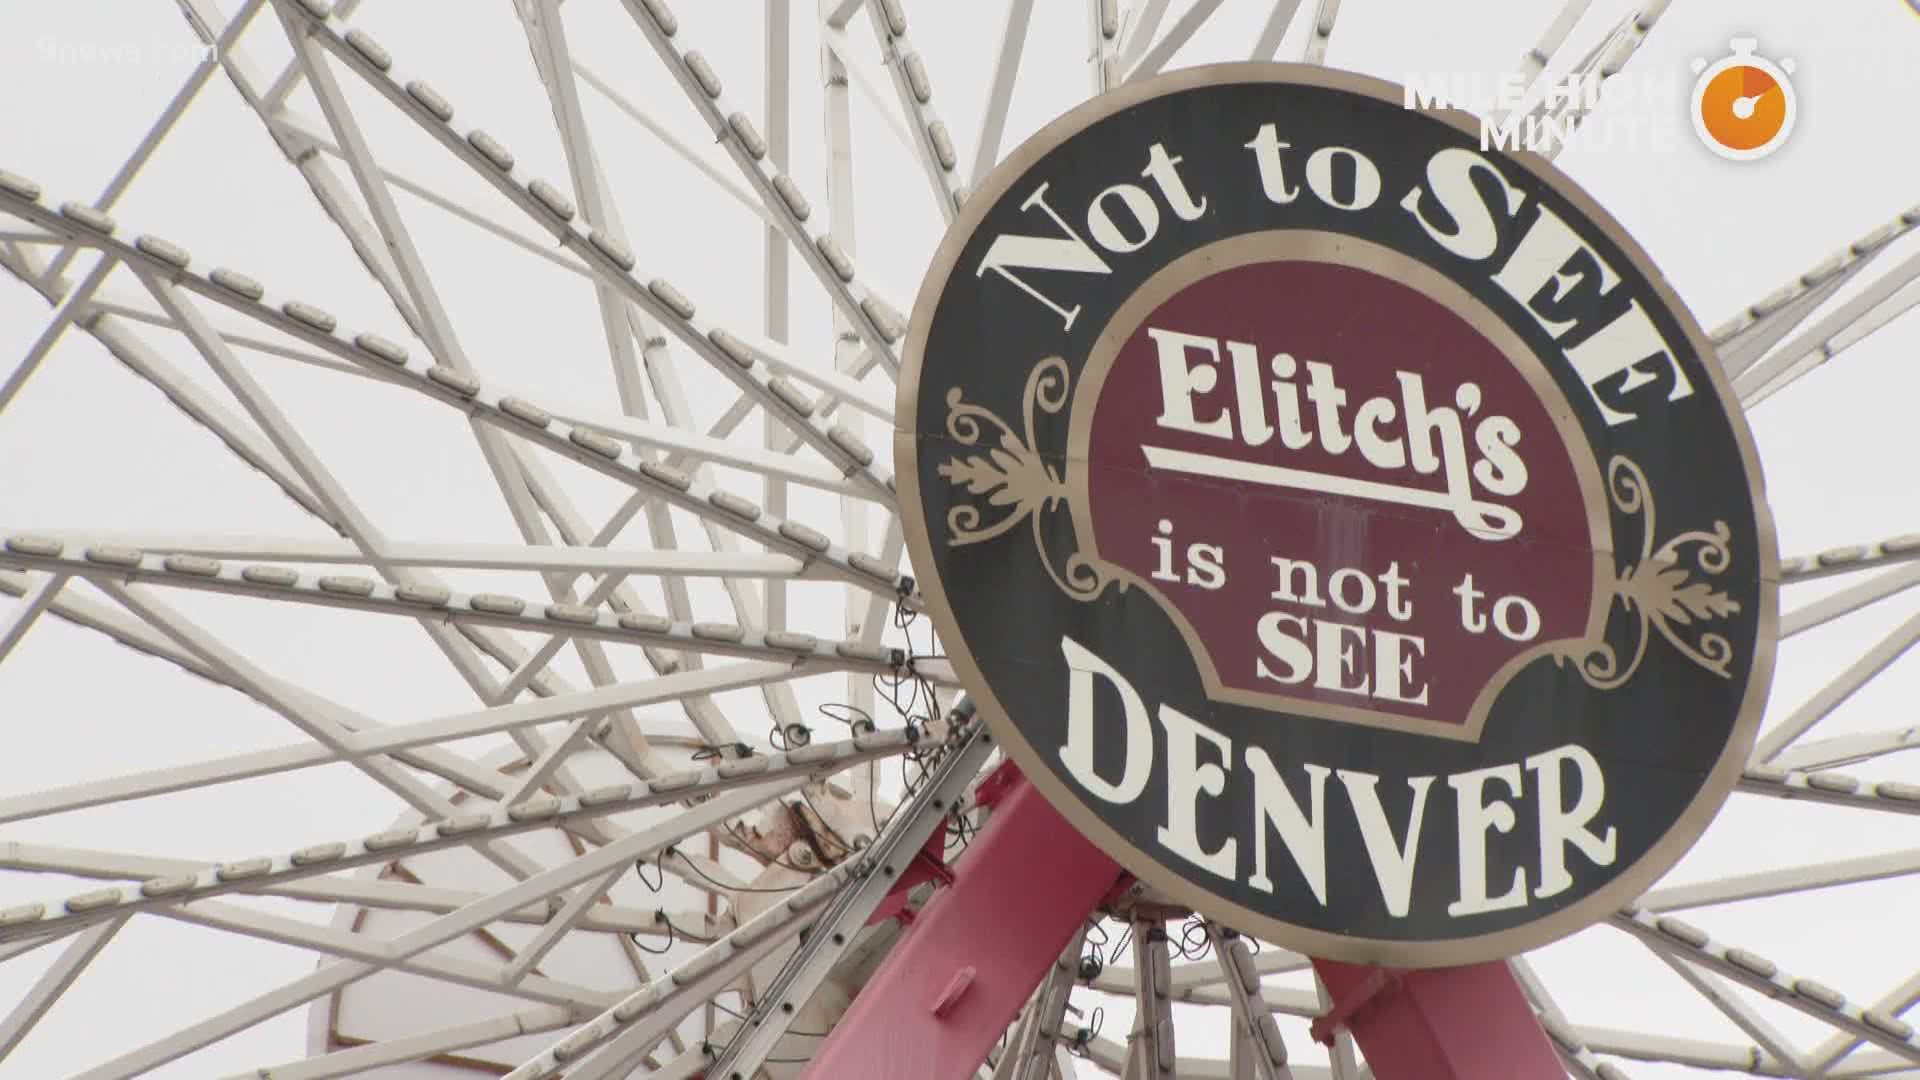 Eddie Randle let's you know what to expect as Elitch Gardens reopens for the first time in more than a year after the pandemic forced it to remain closed in 2020.